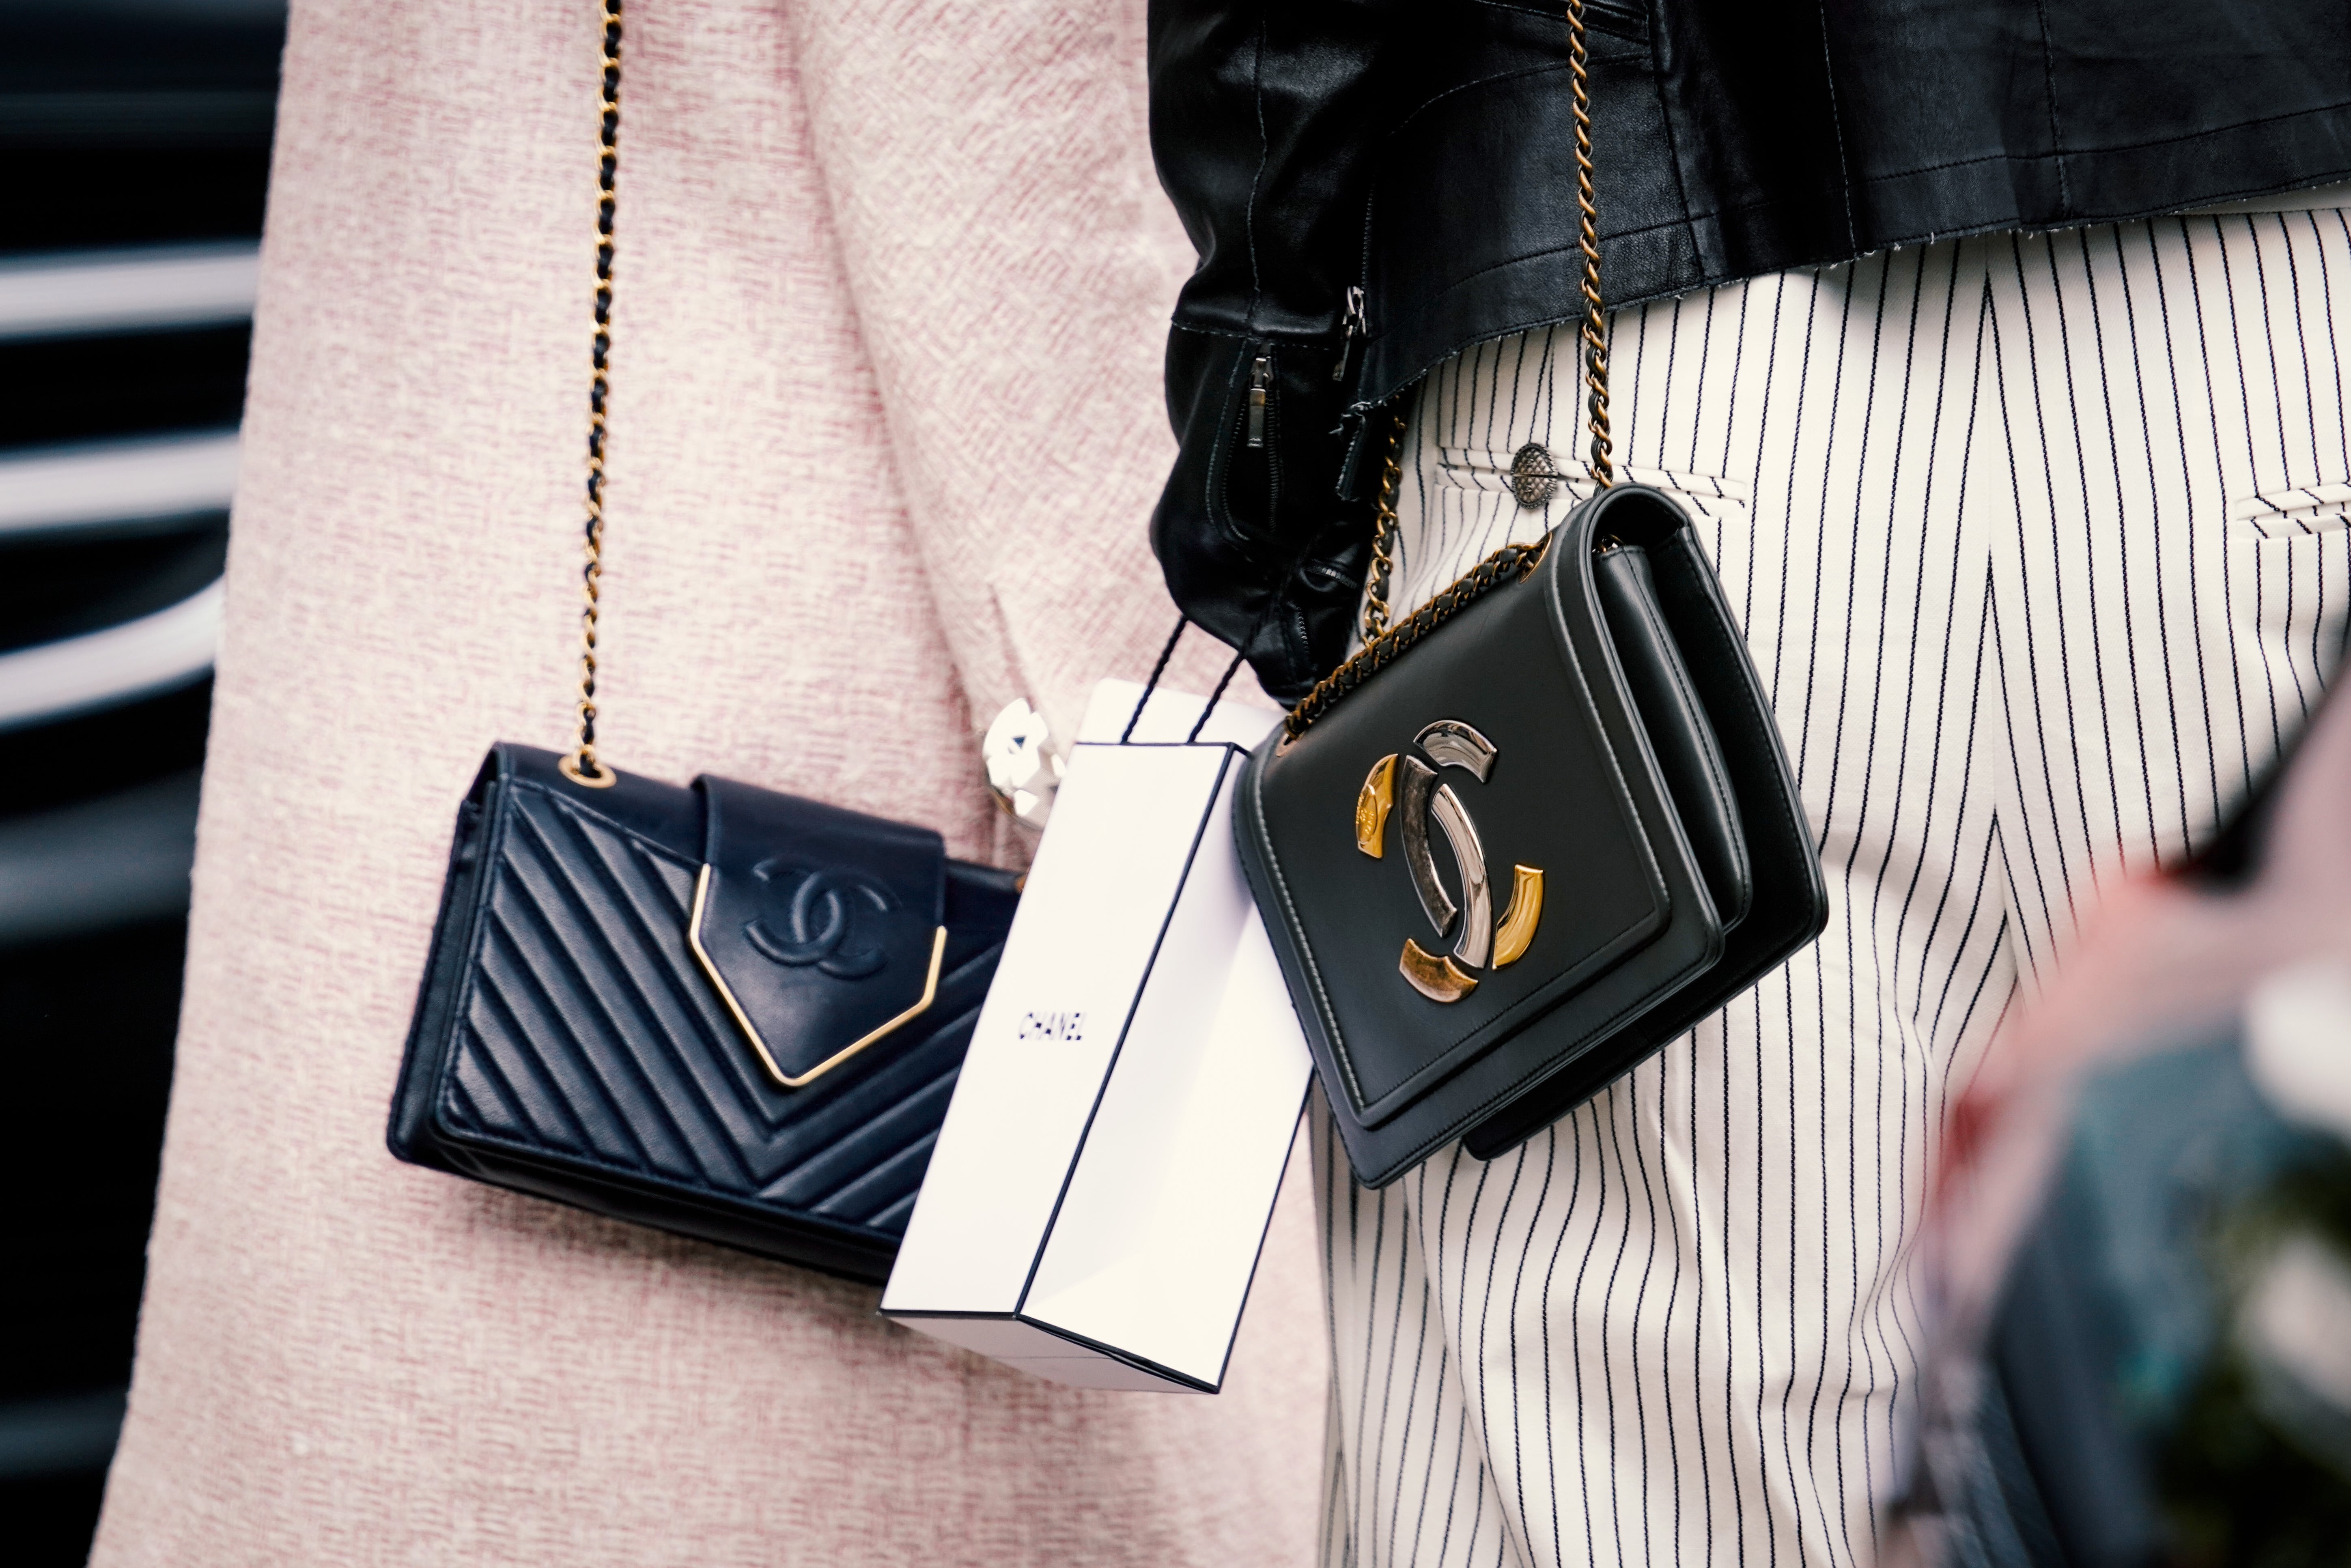 The best Chanel bags to invest in according to experts